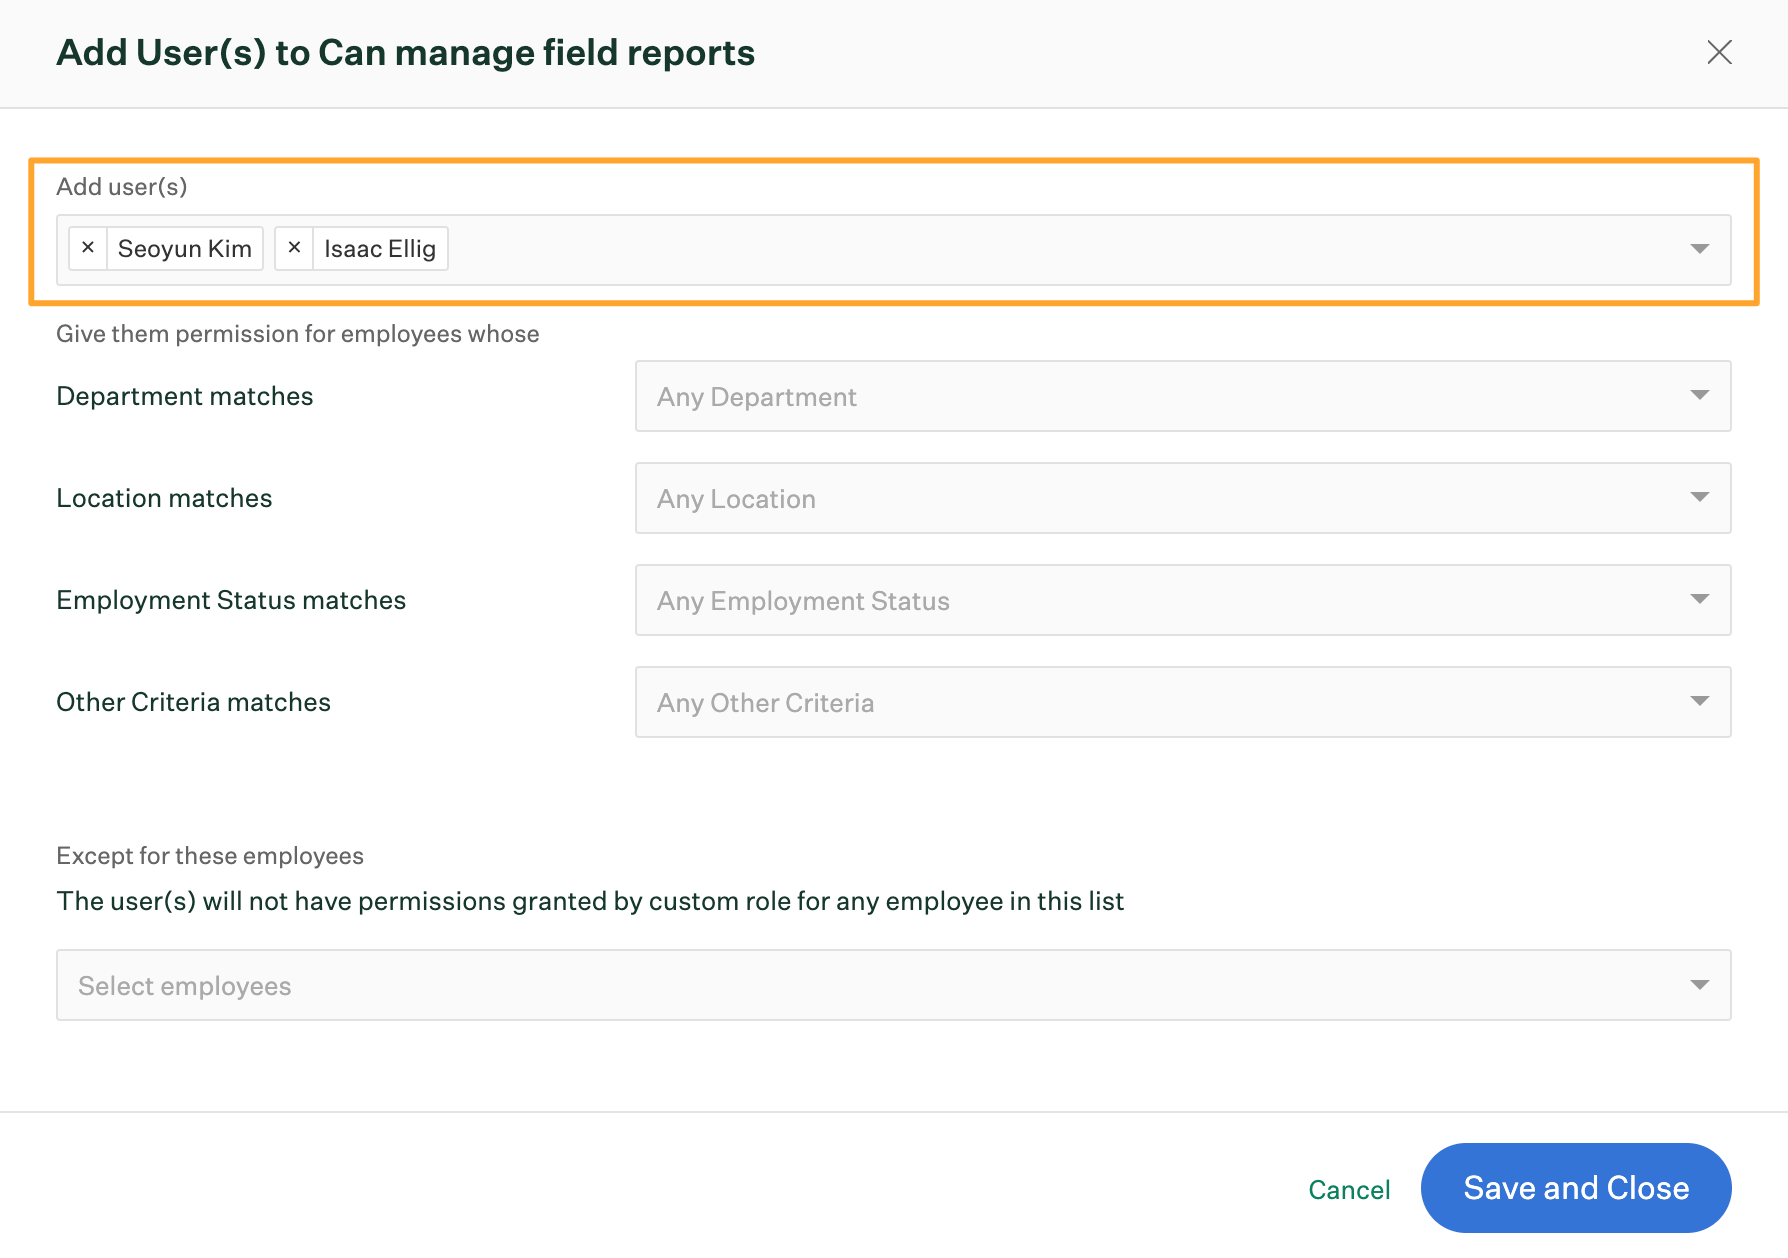 Can manage field reports new custom role with users selected in Add users field